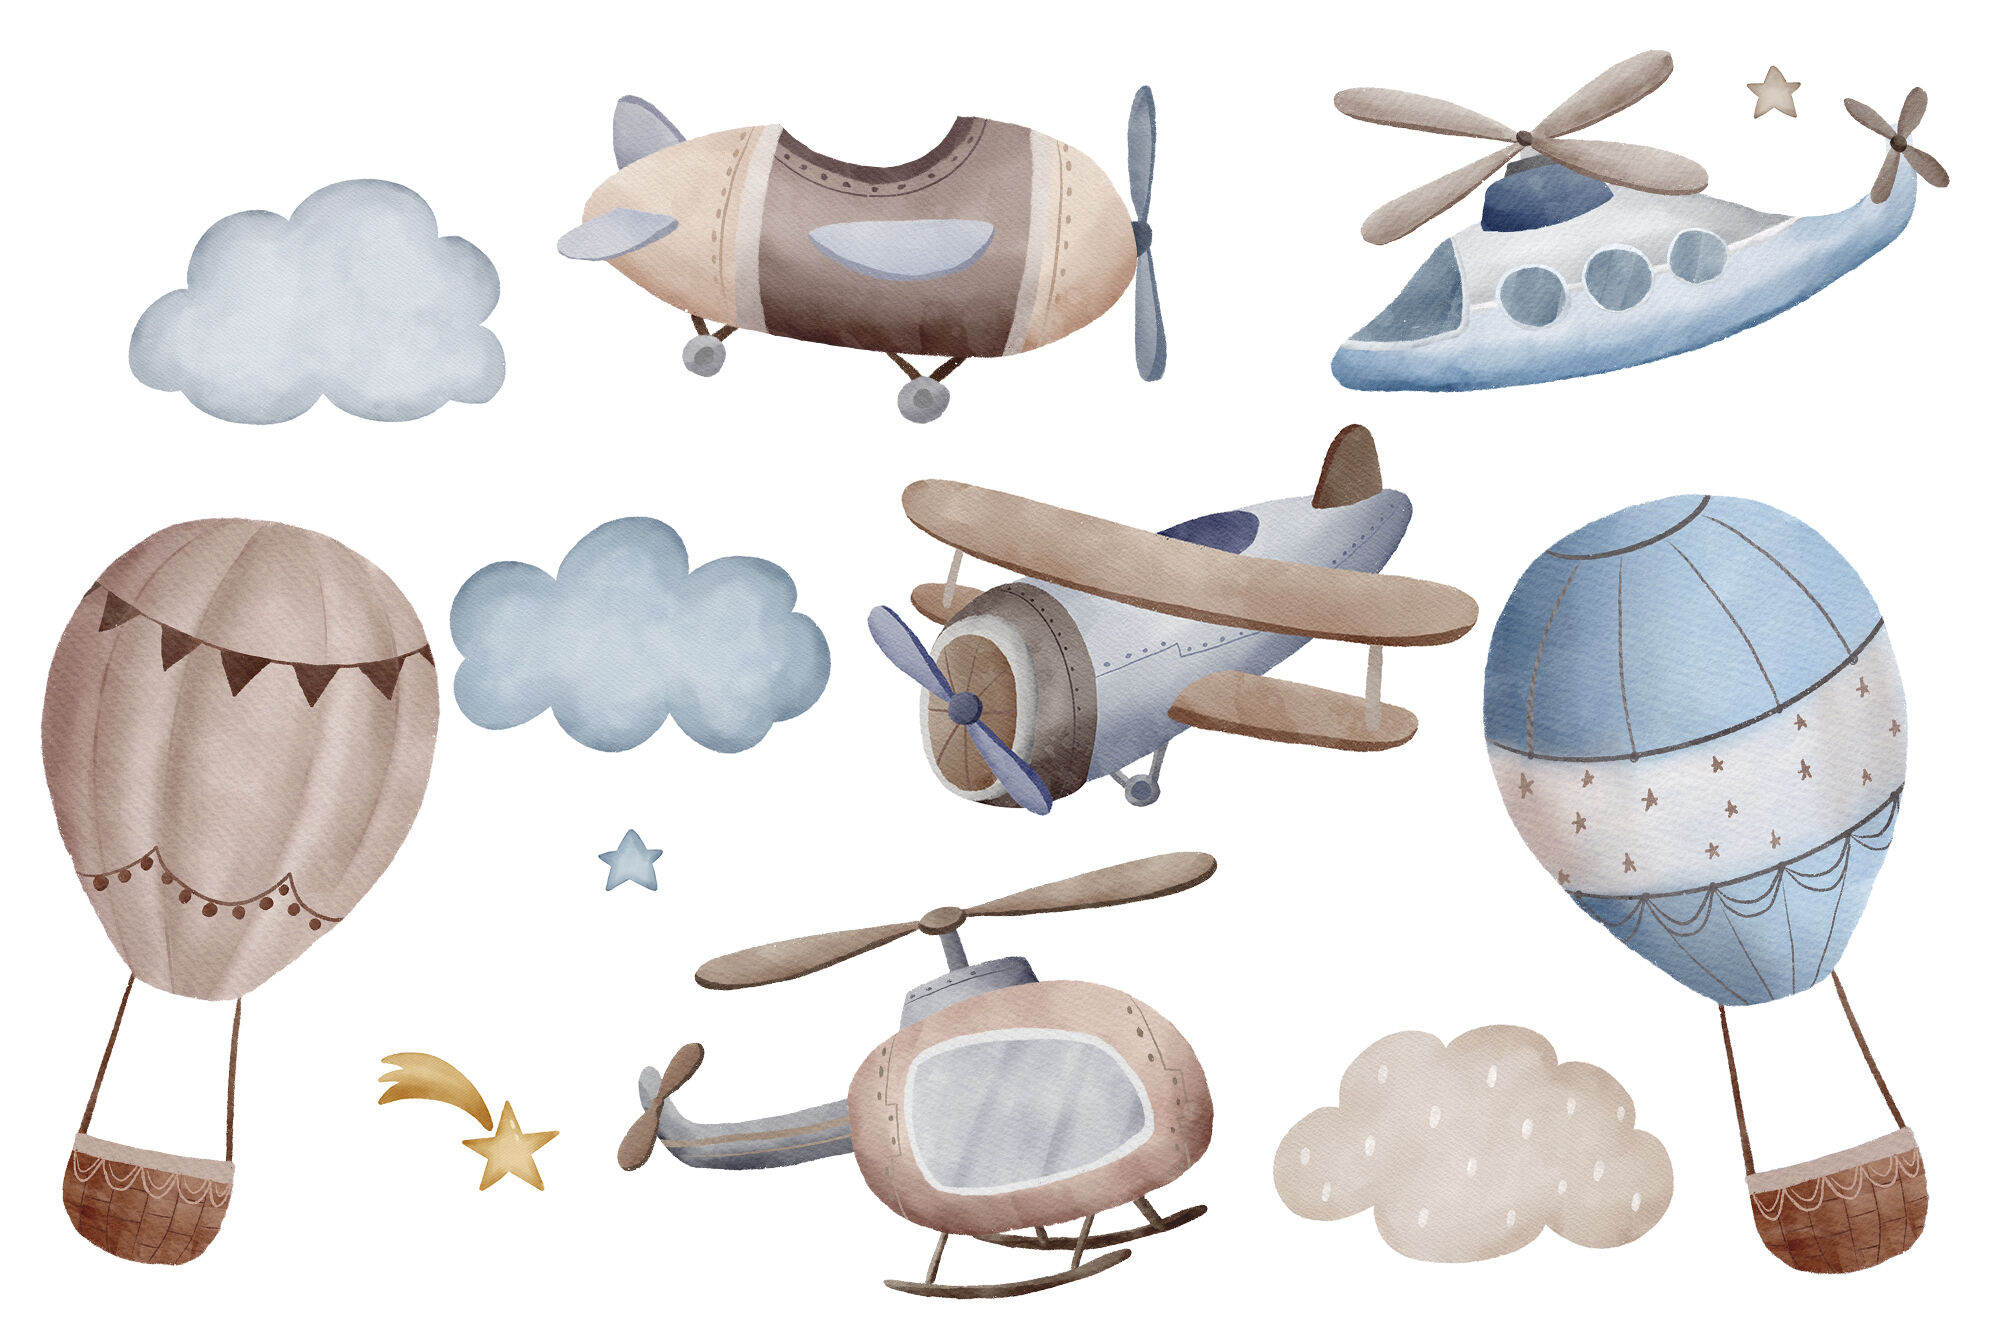 biplane clipart png